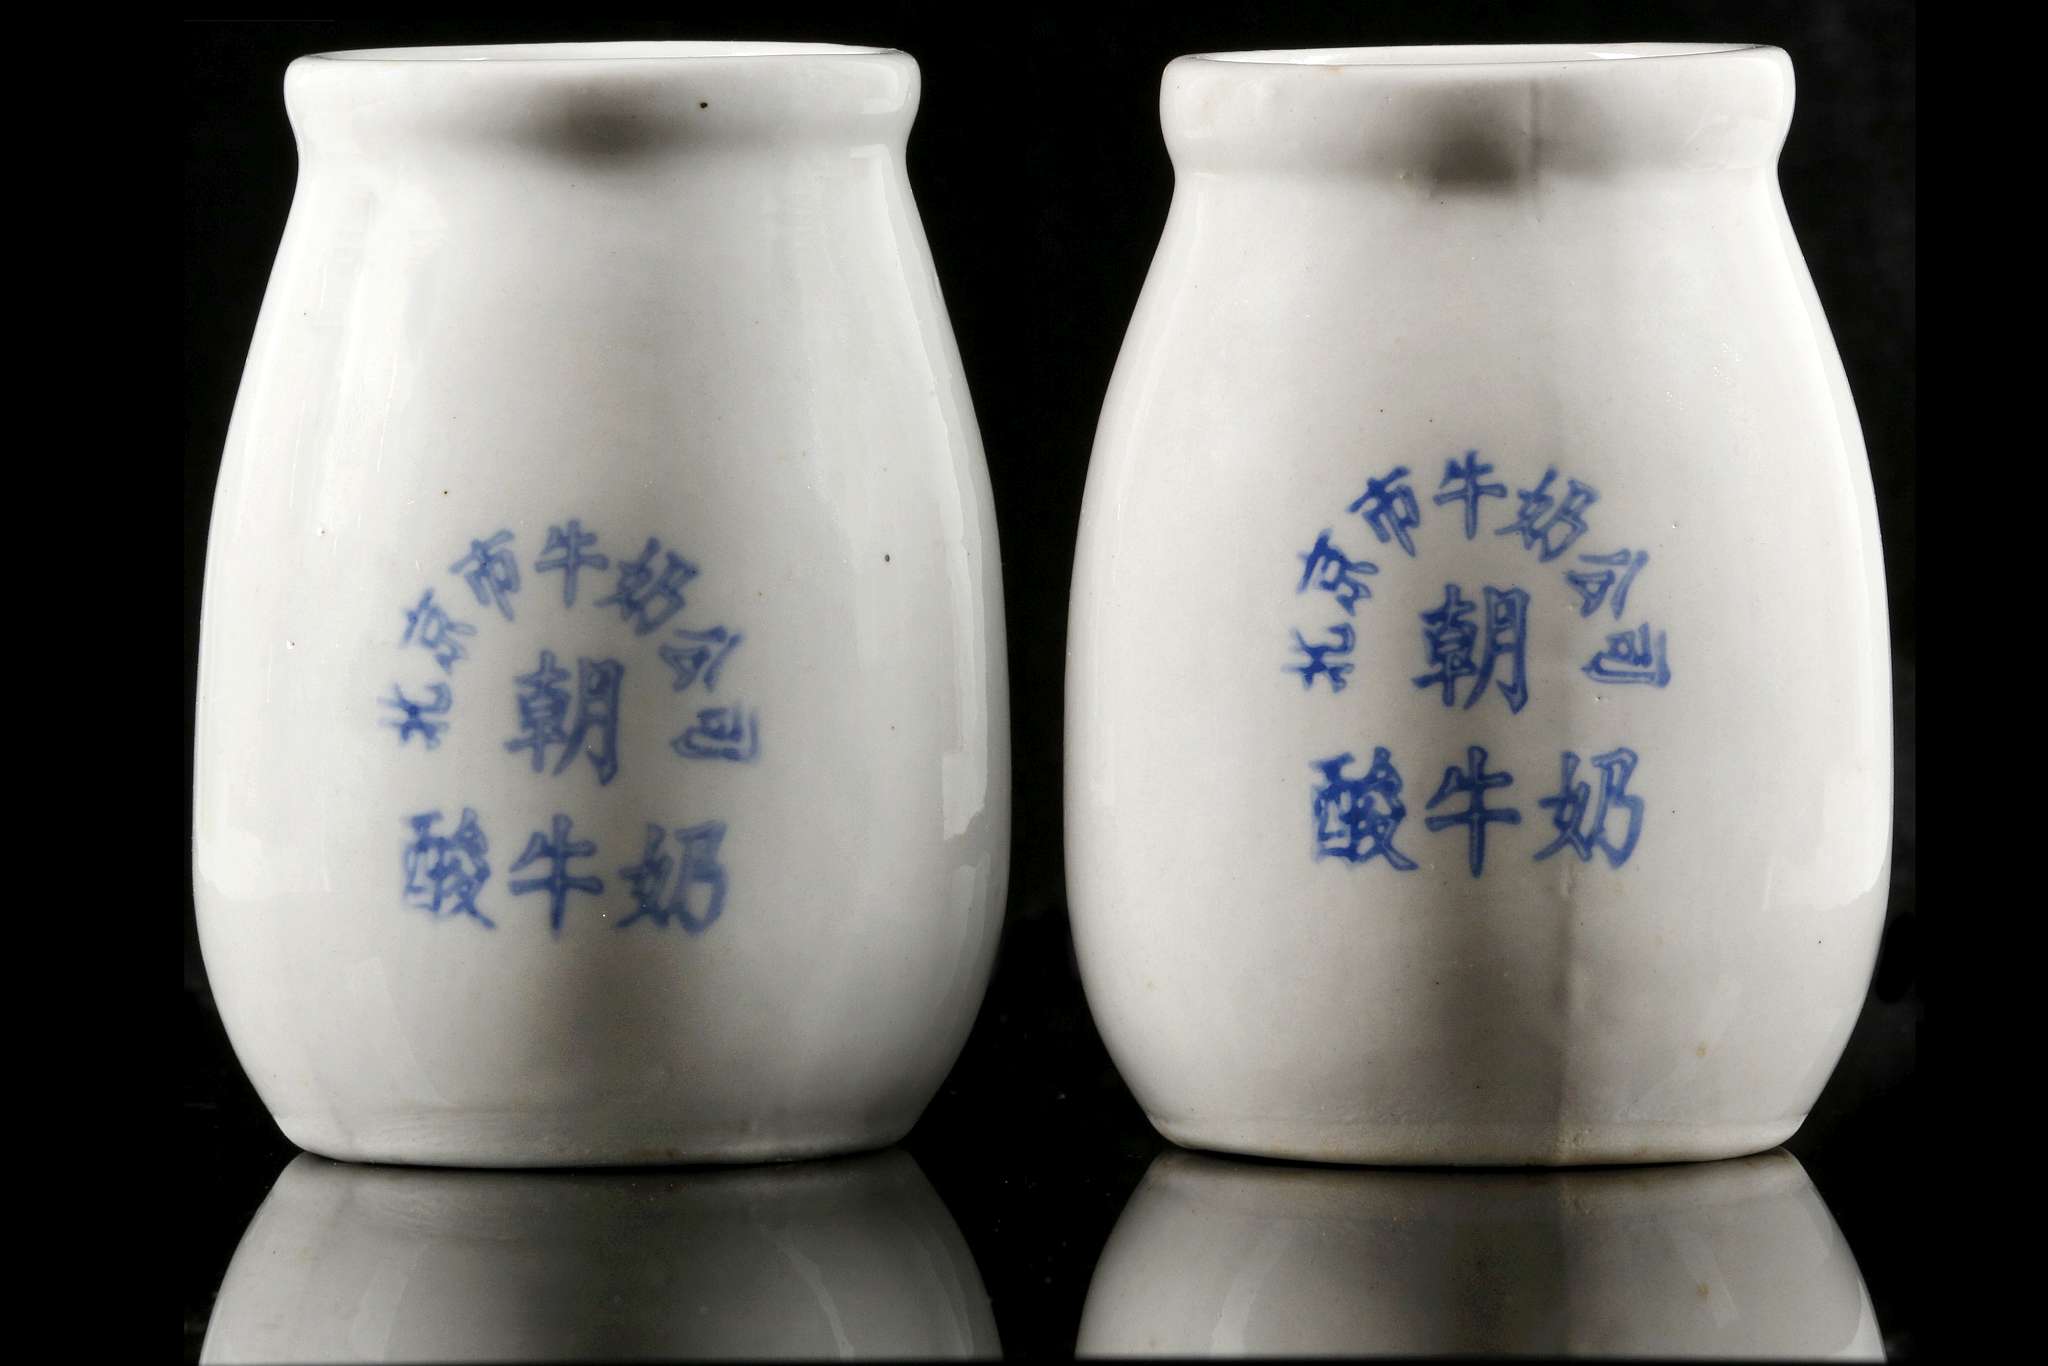 A PAIR OF CERAMIC MILK BOTTLES.  Mid 1960s.  Thickly potted, with a swelling body, a thick neck